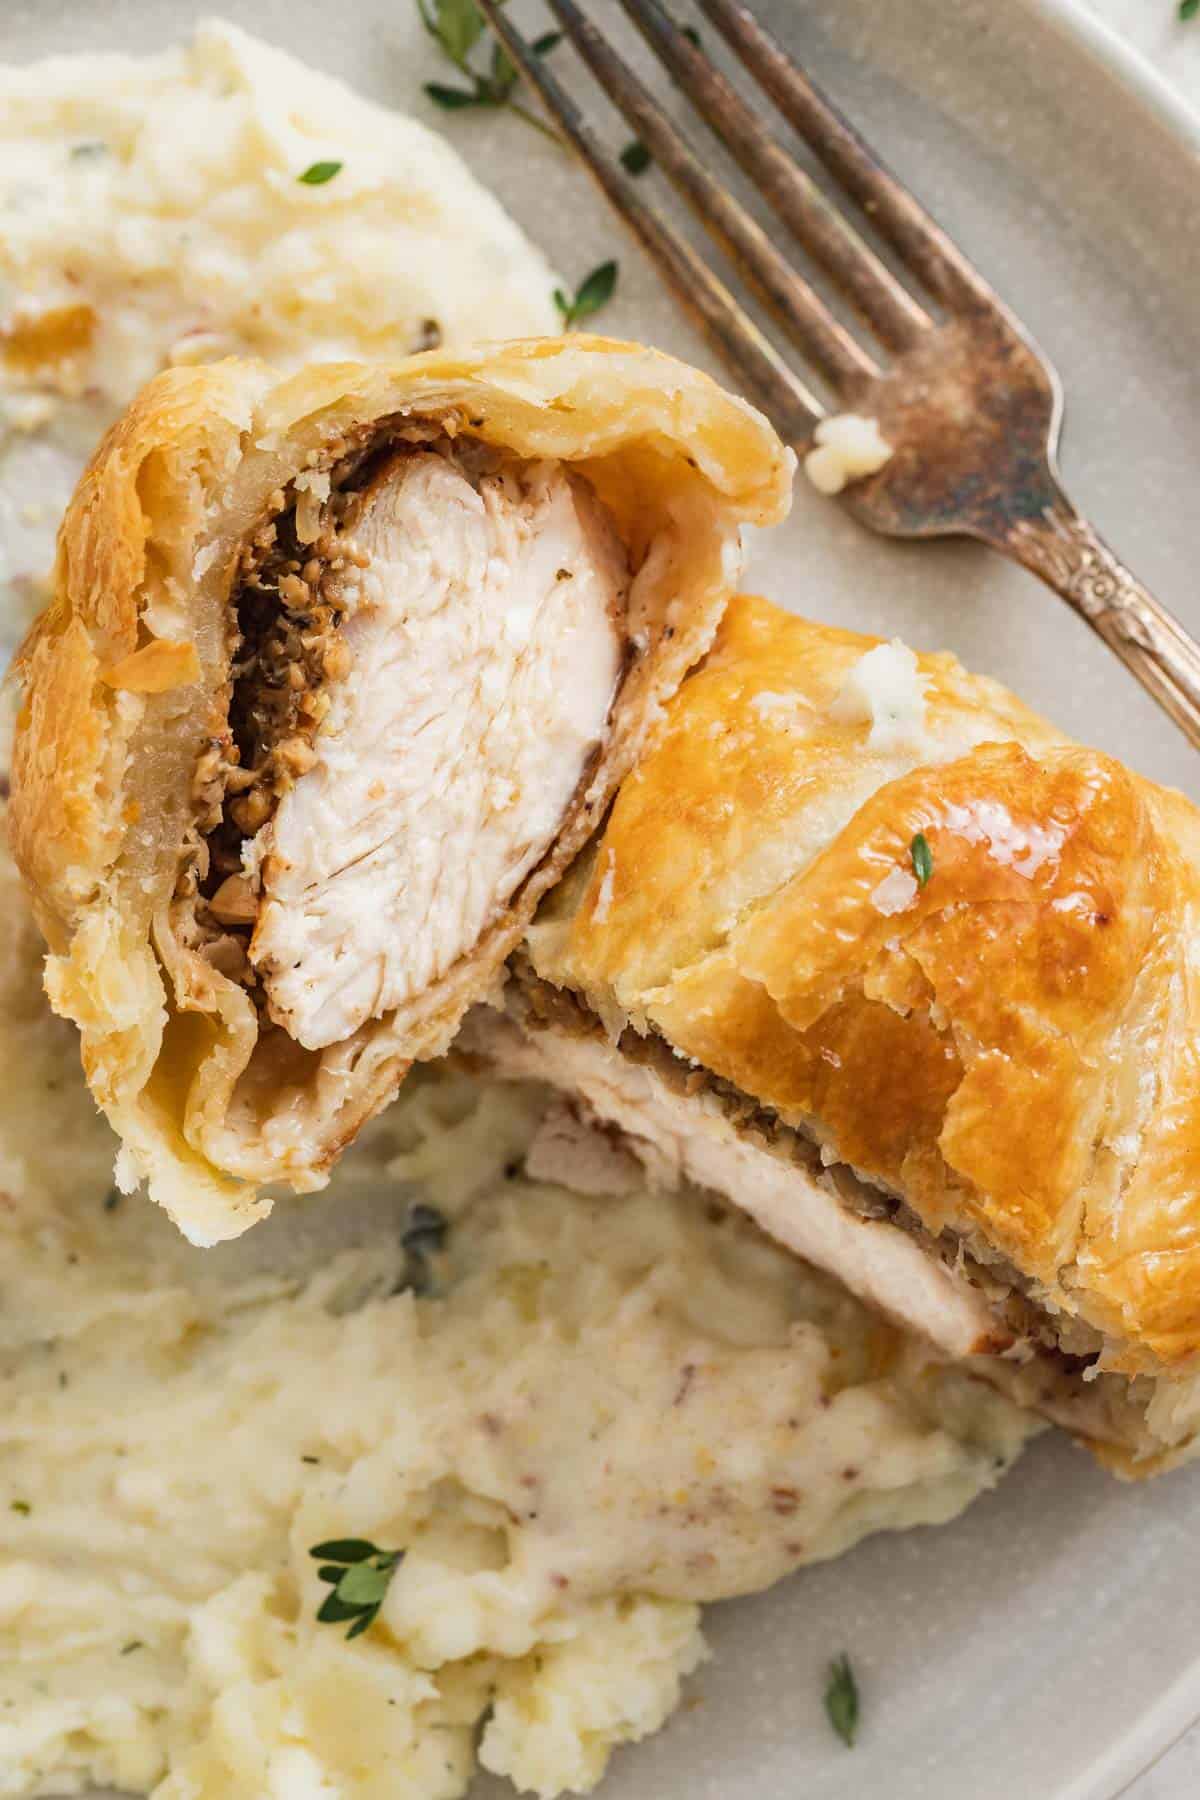 Sliced chicken wellington to show the mushroom duxelle and dijon coating on the chicken breast inside the puff pastry.